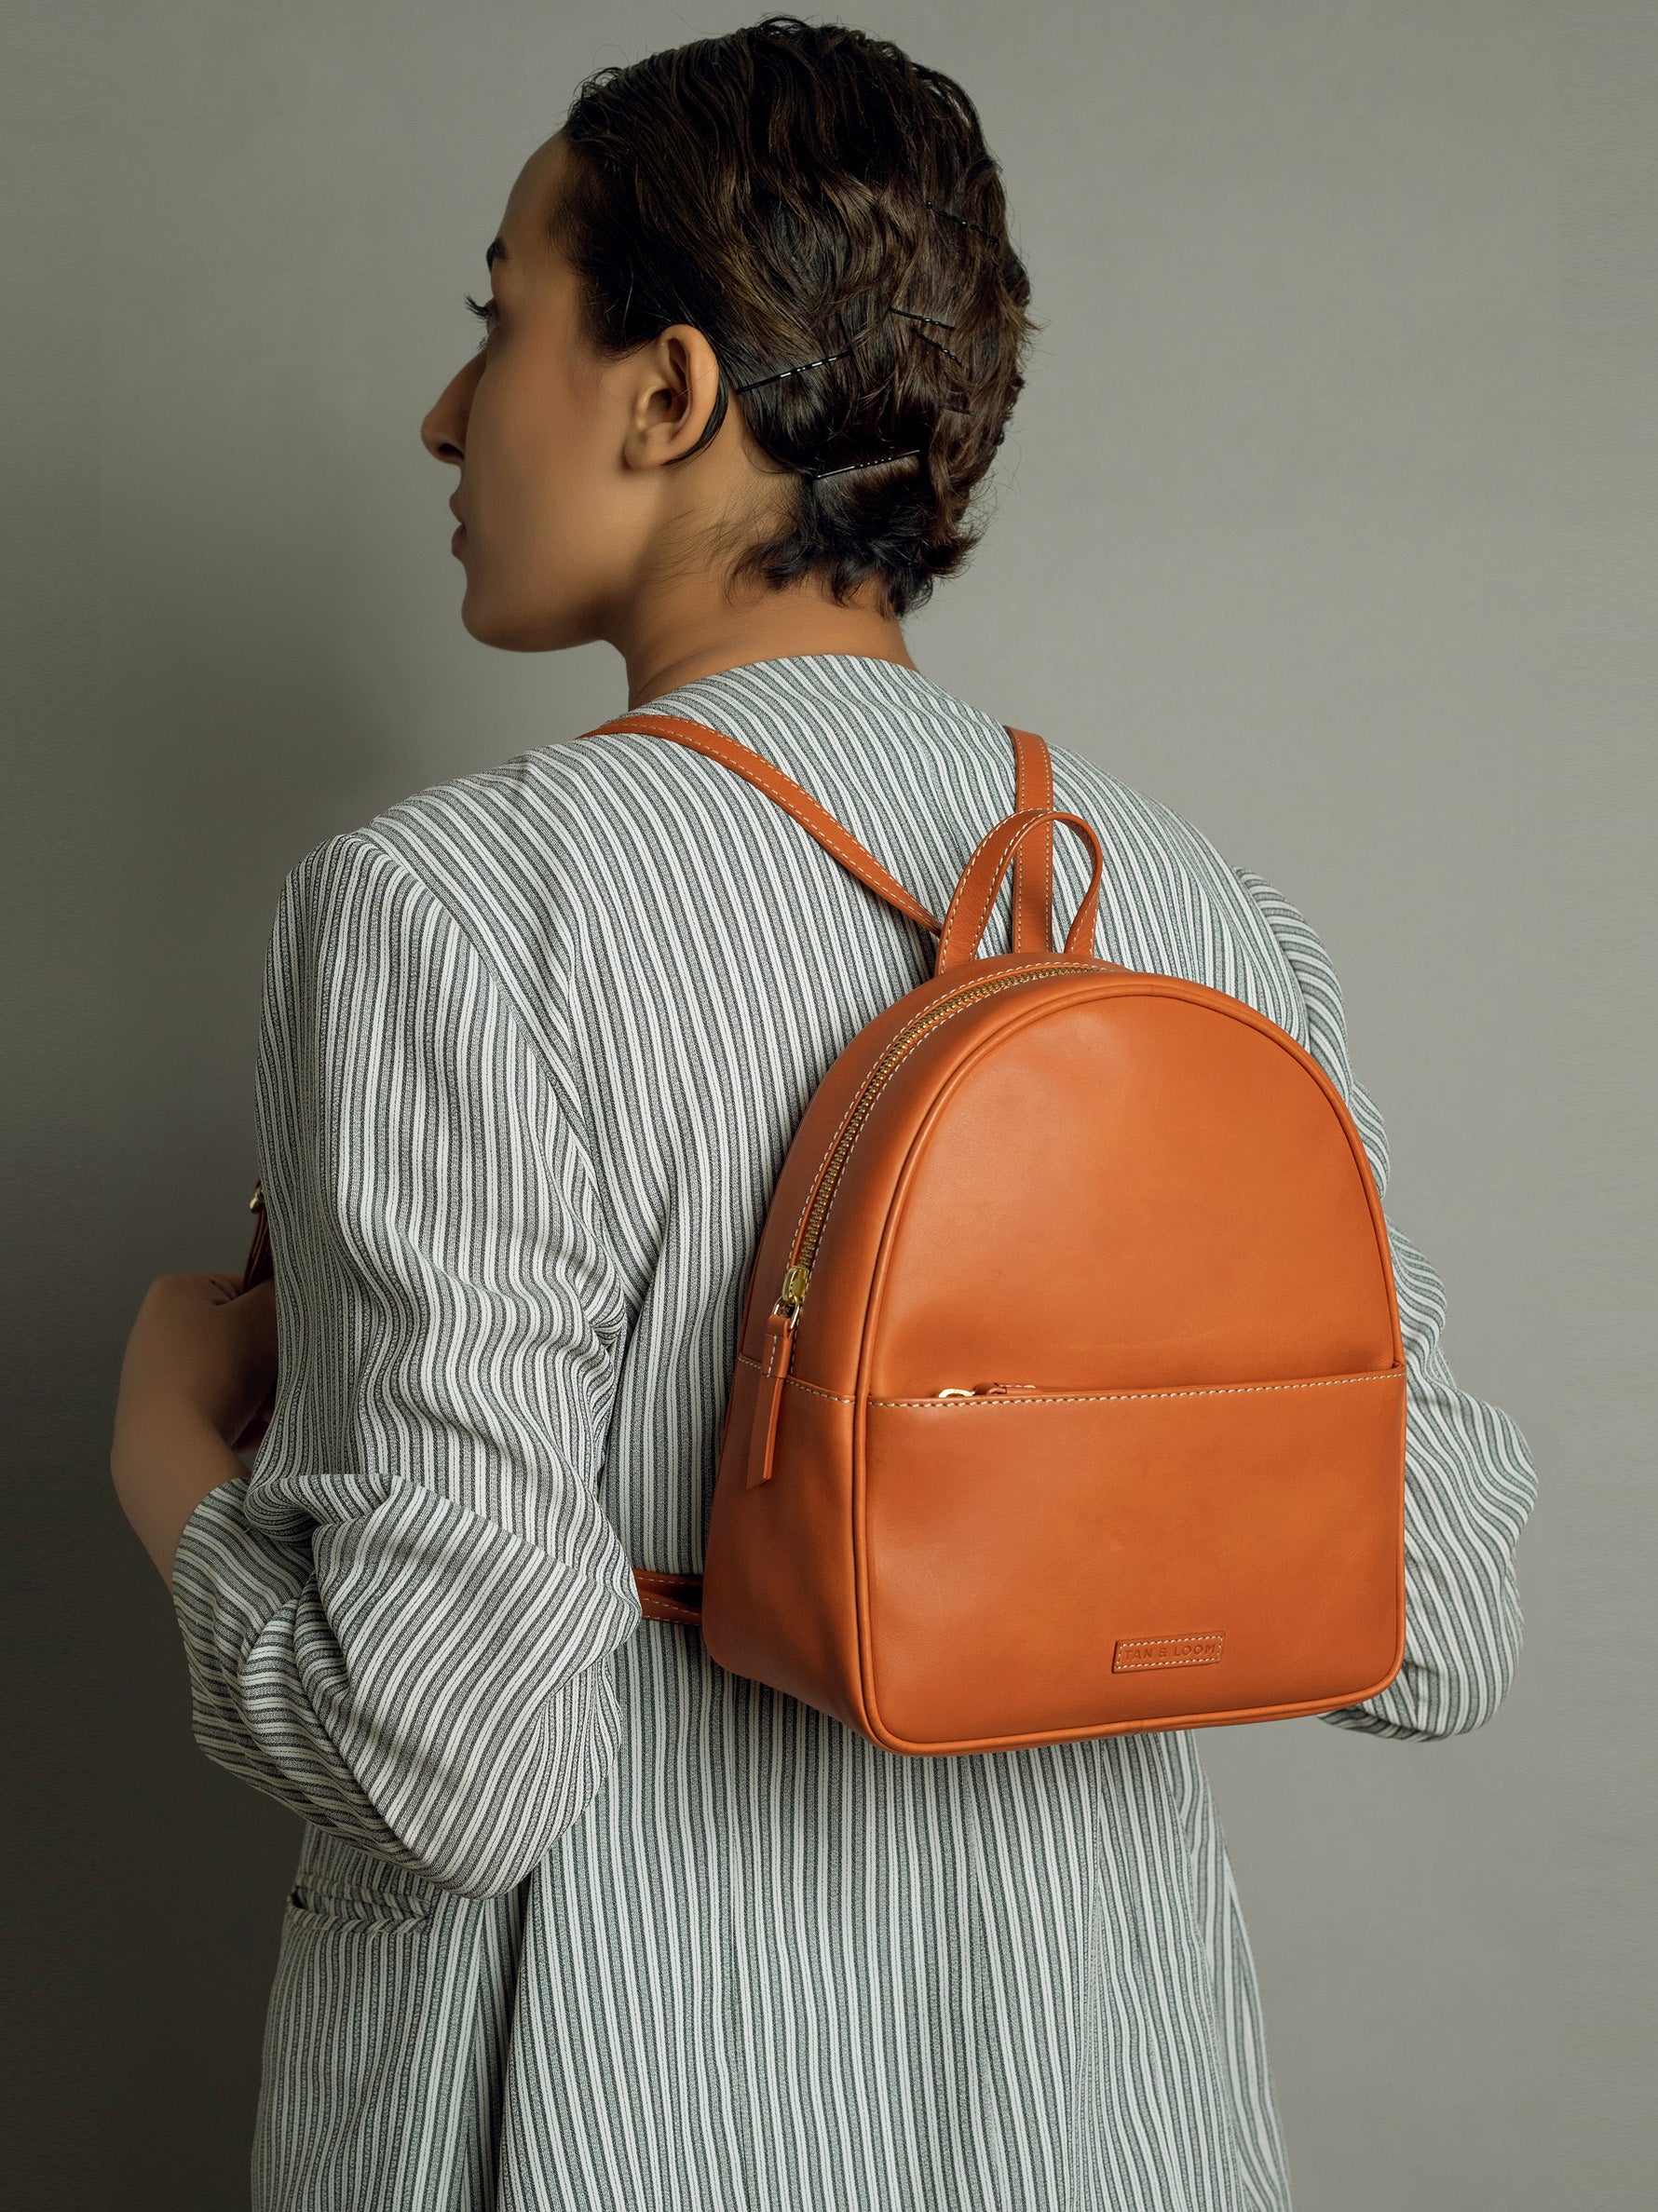 Handcrafted Genuine Vegetable Tanned Leather Backpack for women Tan Colour Tan & Loom